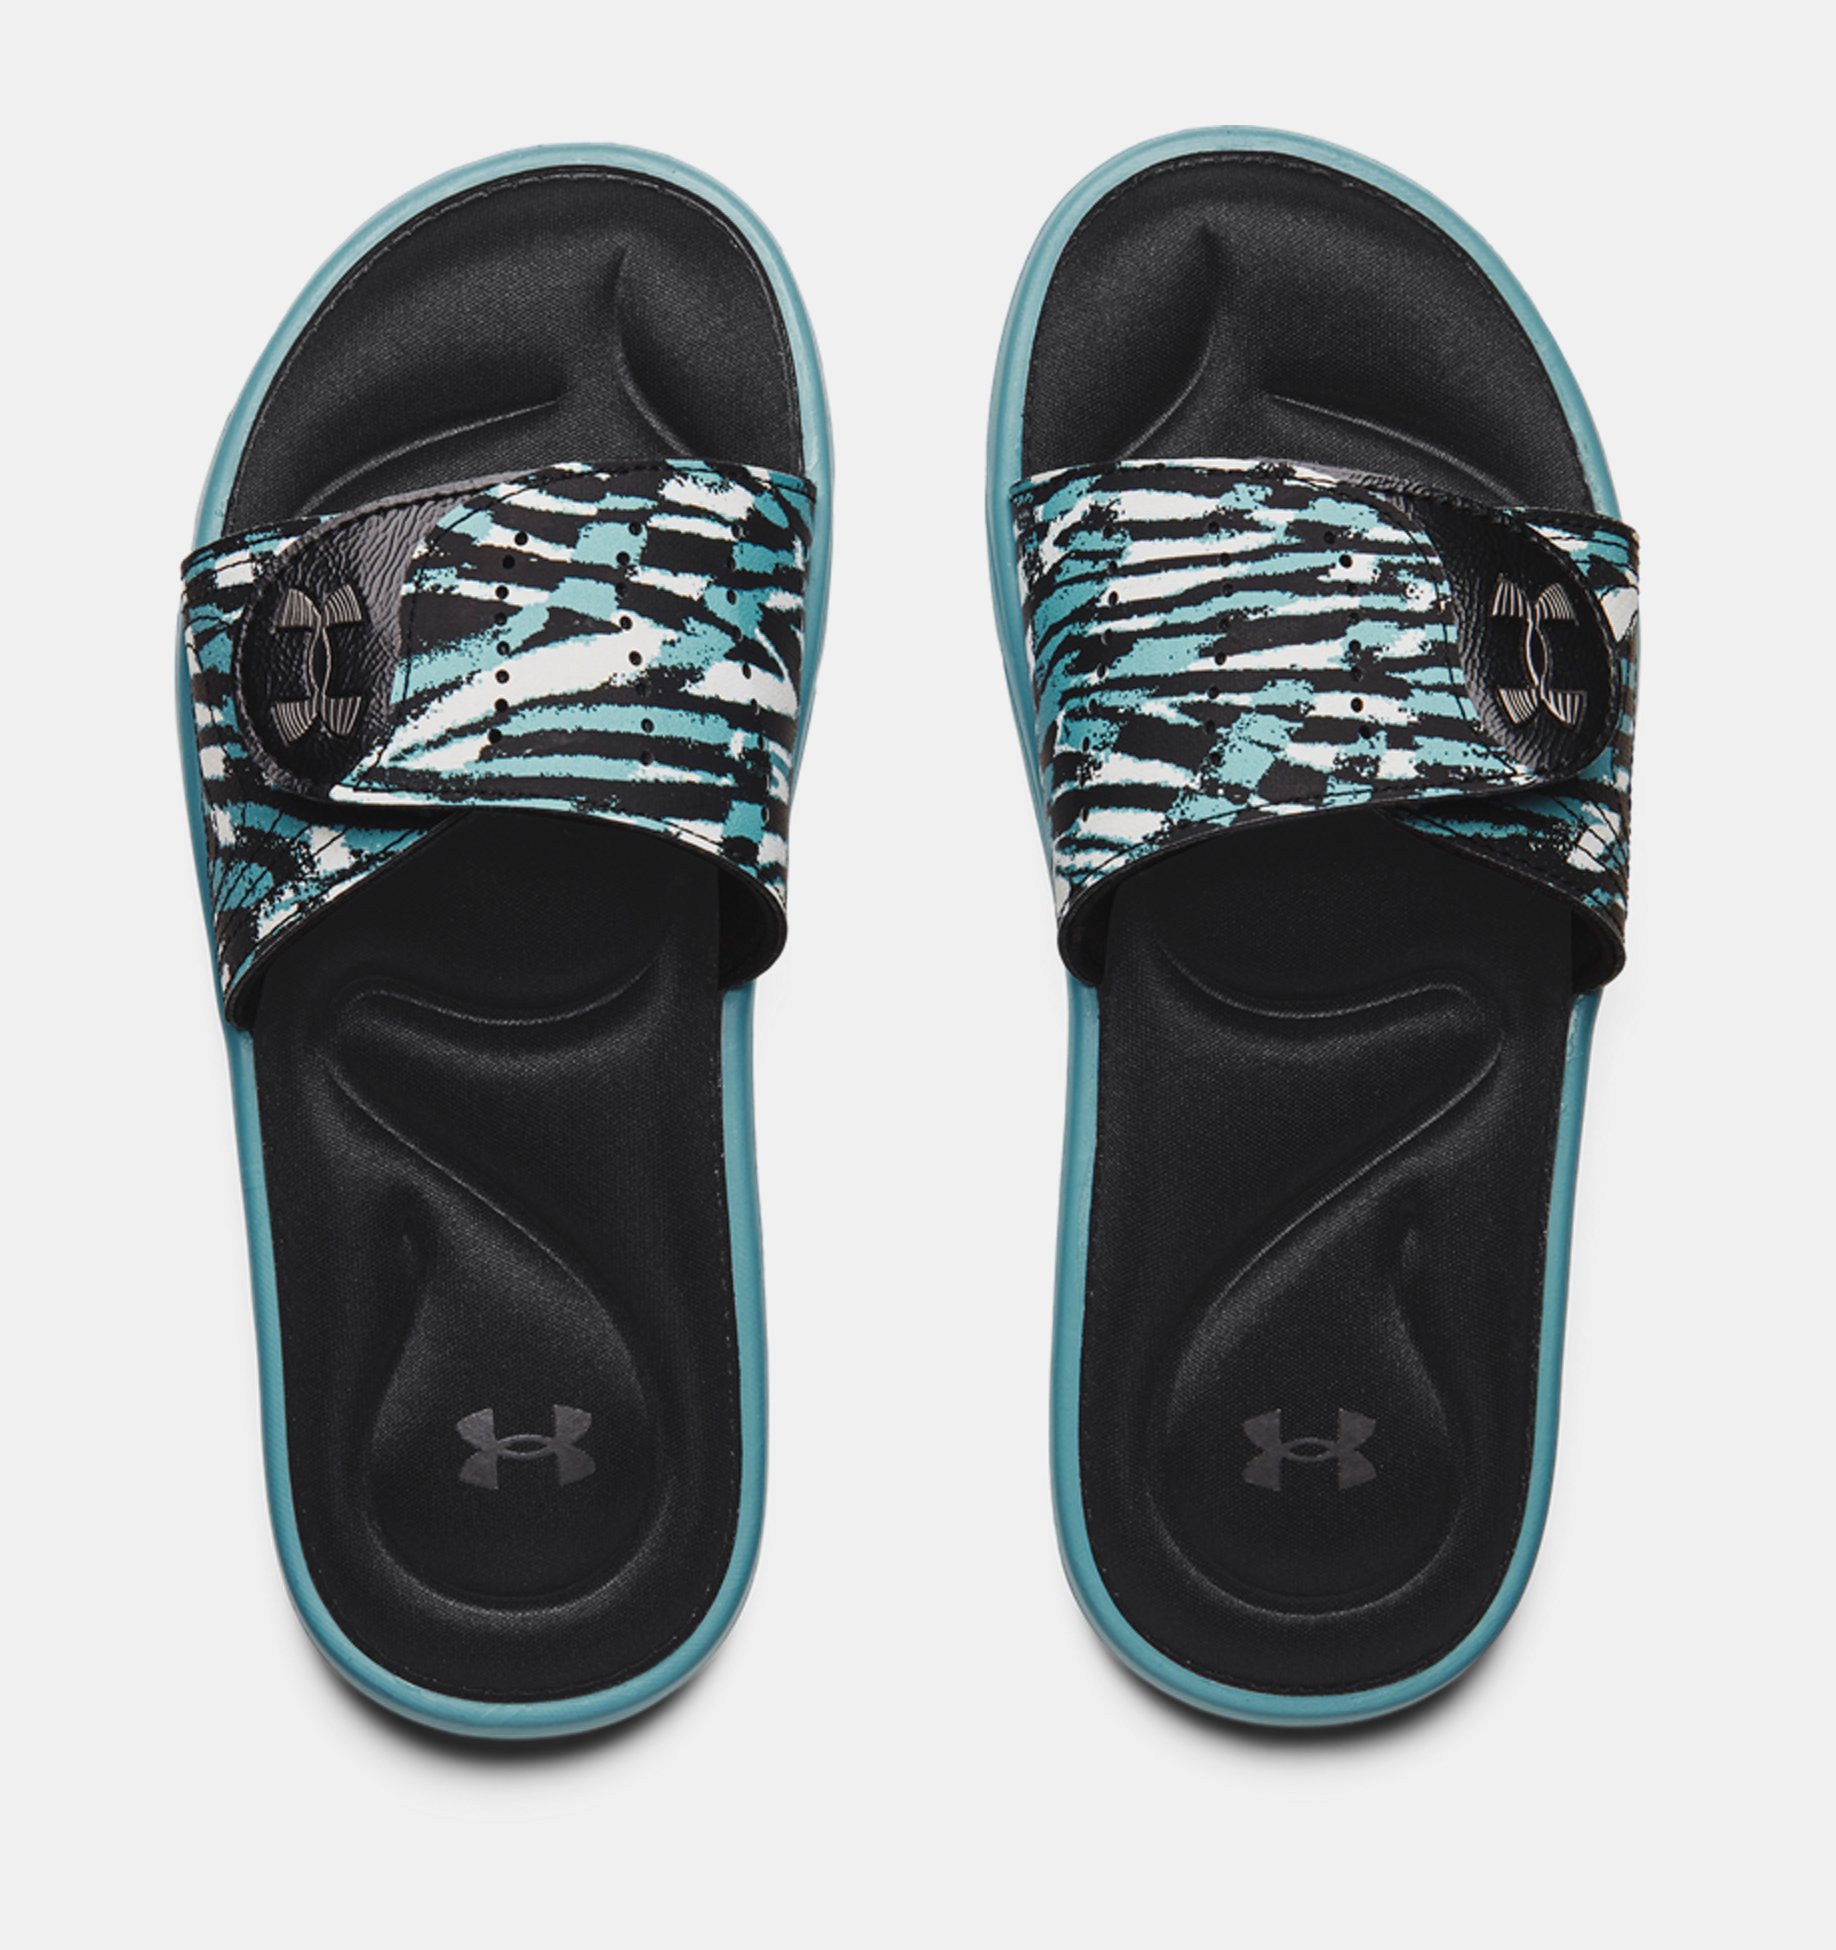 Under Armour Women's Ignite Adjustable Top Slide Sandals (various) $9.55 + free shipping